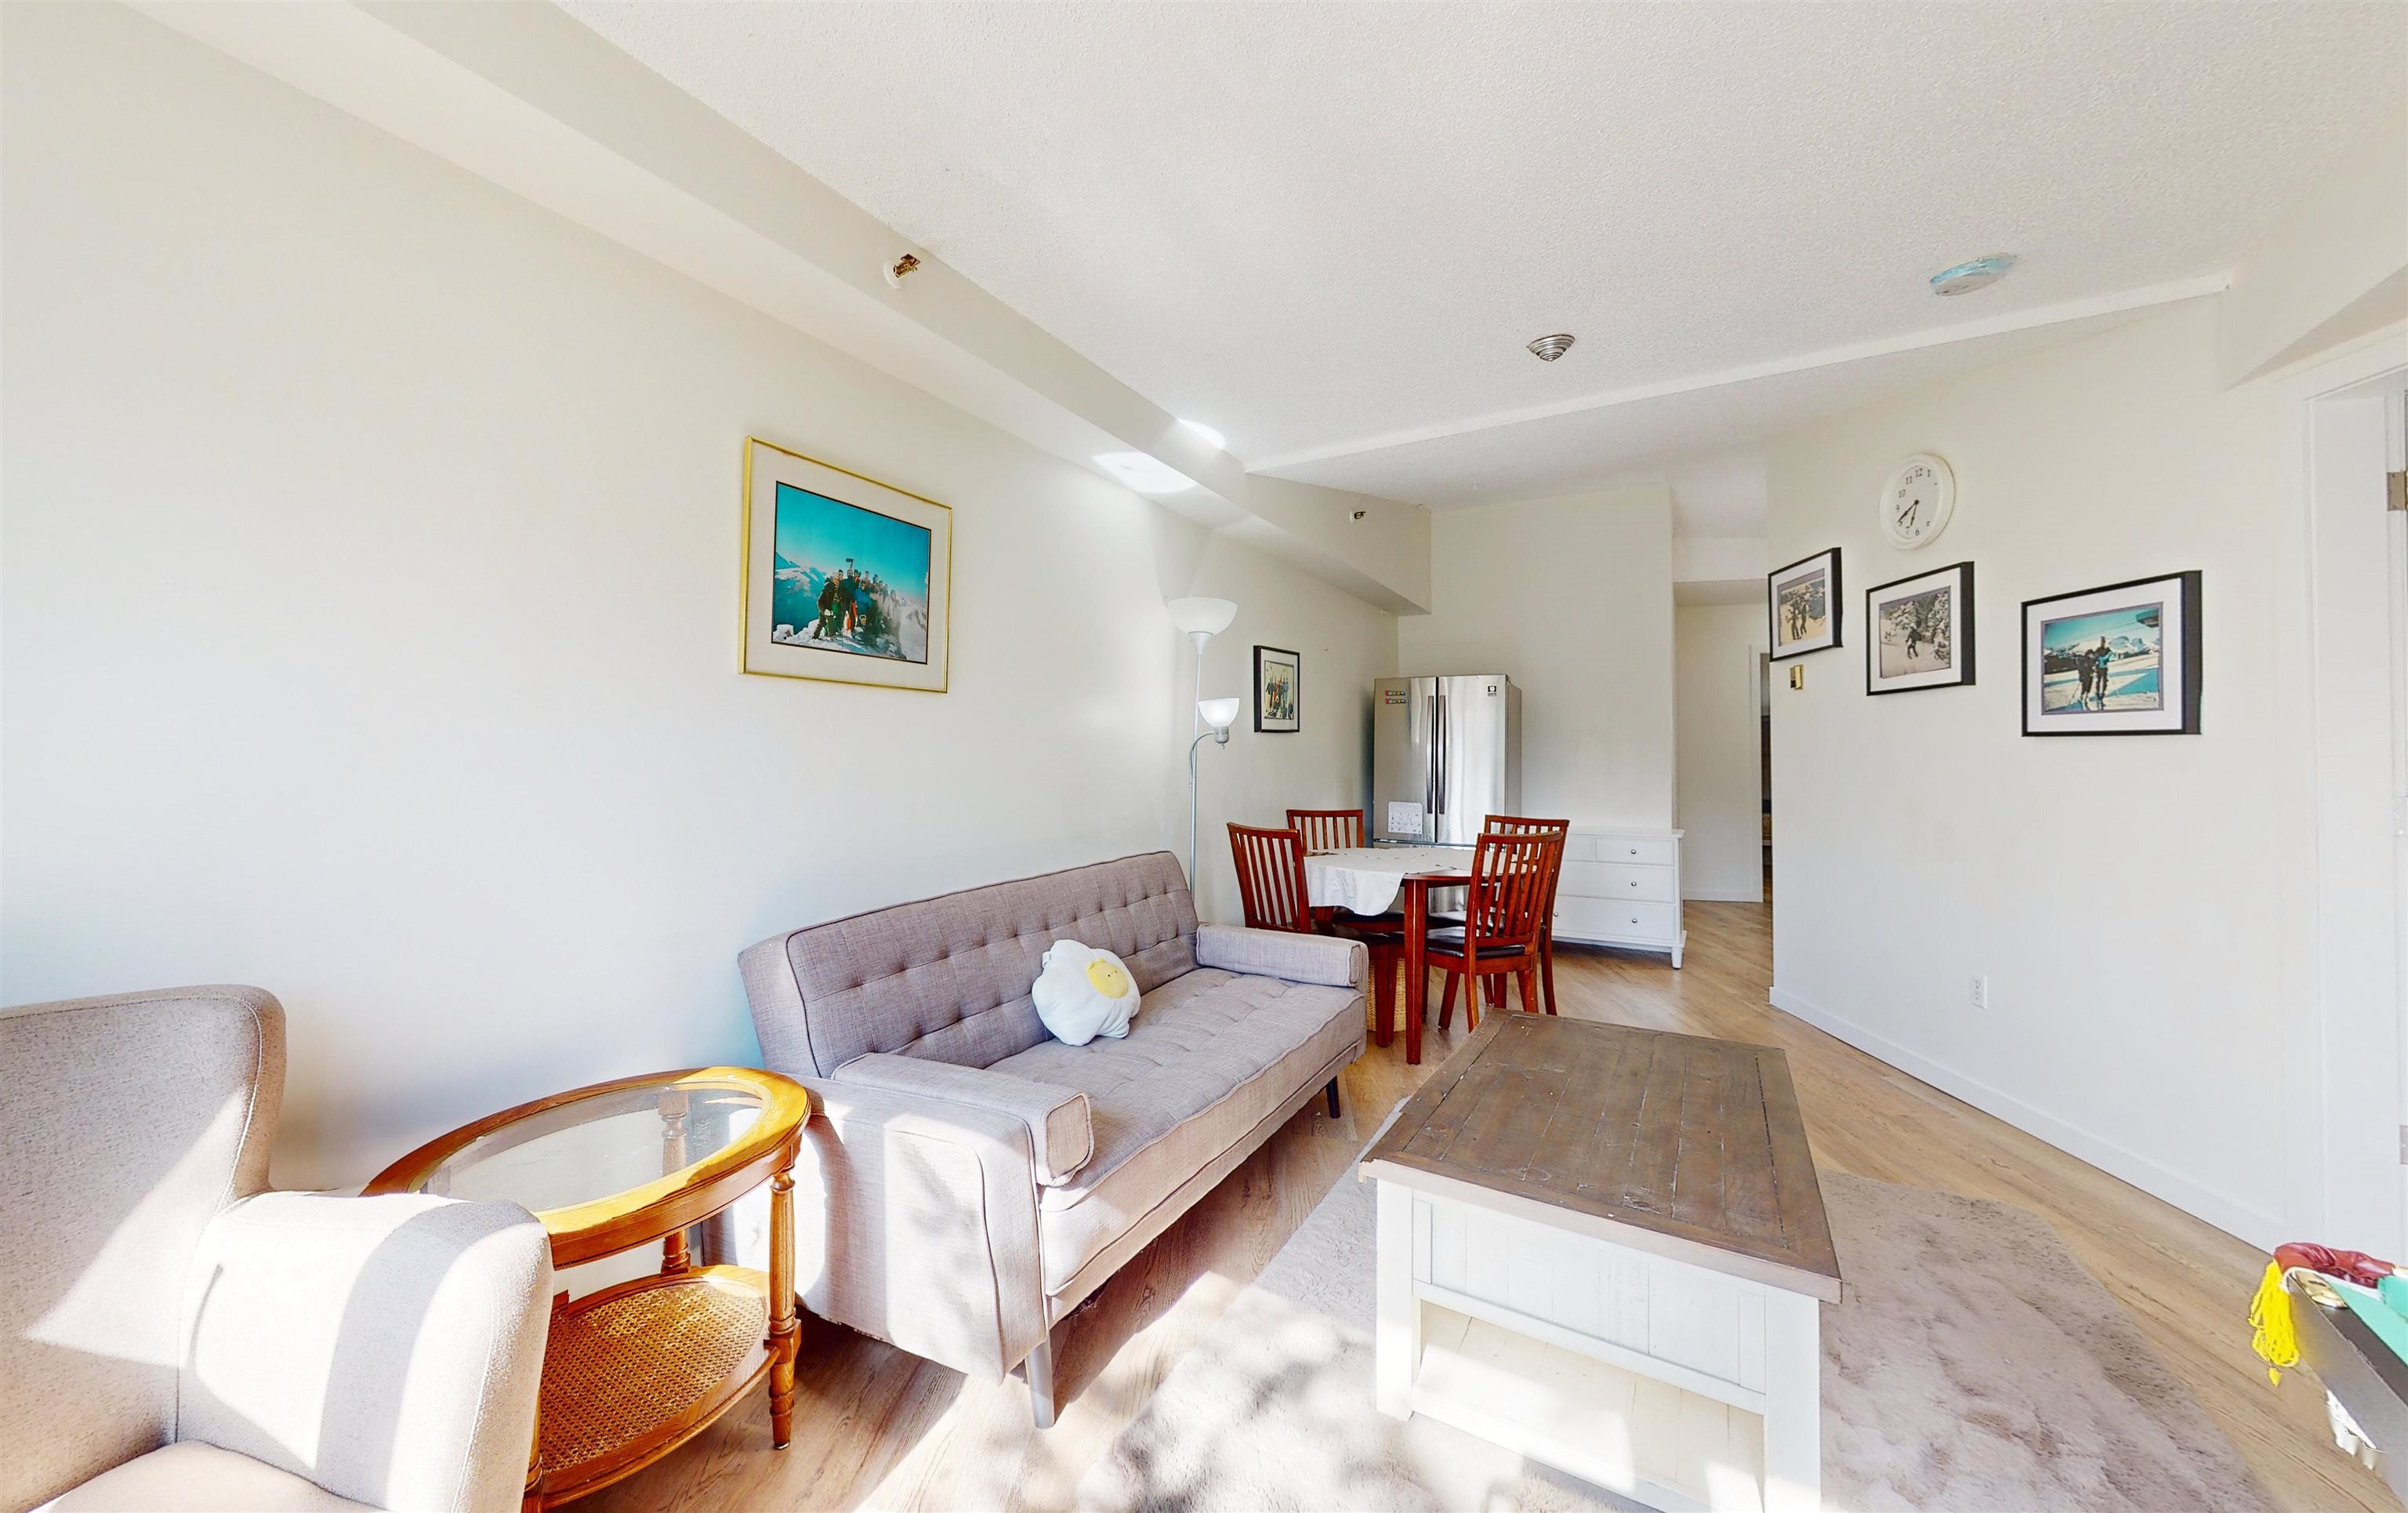 Listing image of 405/406 2111 WHISTLER ROAD